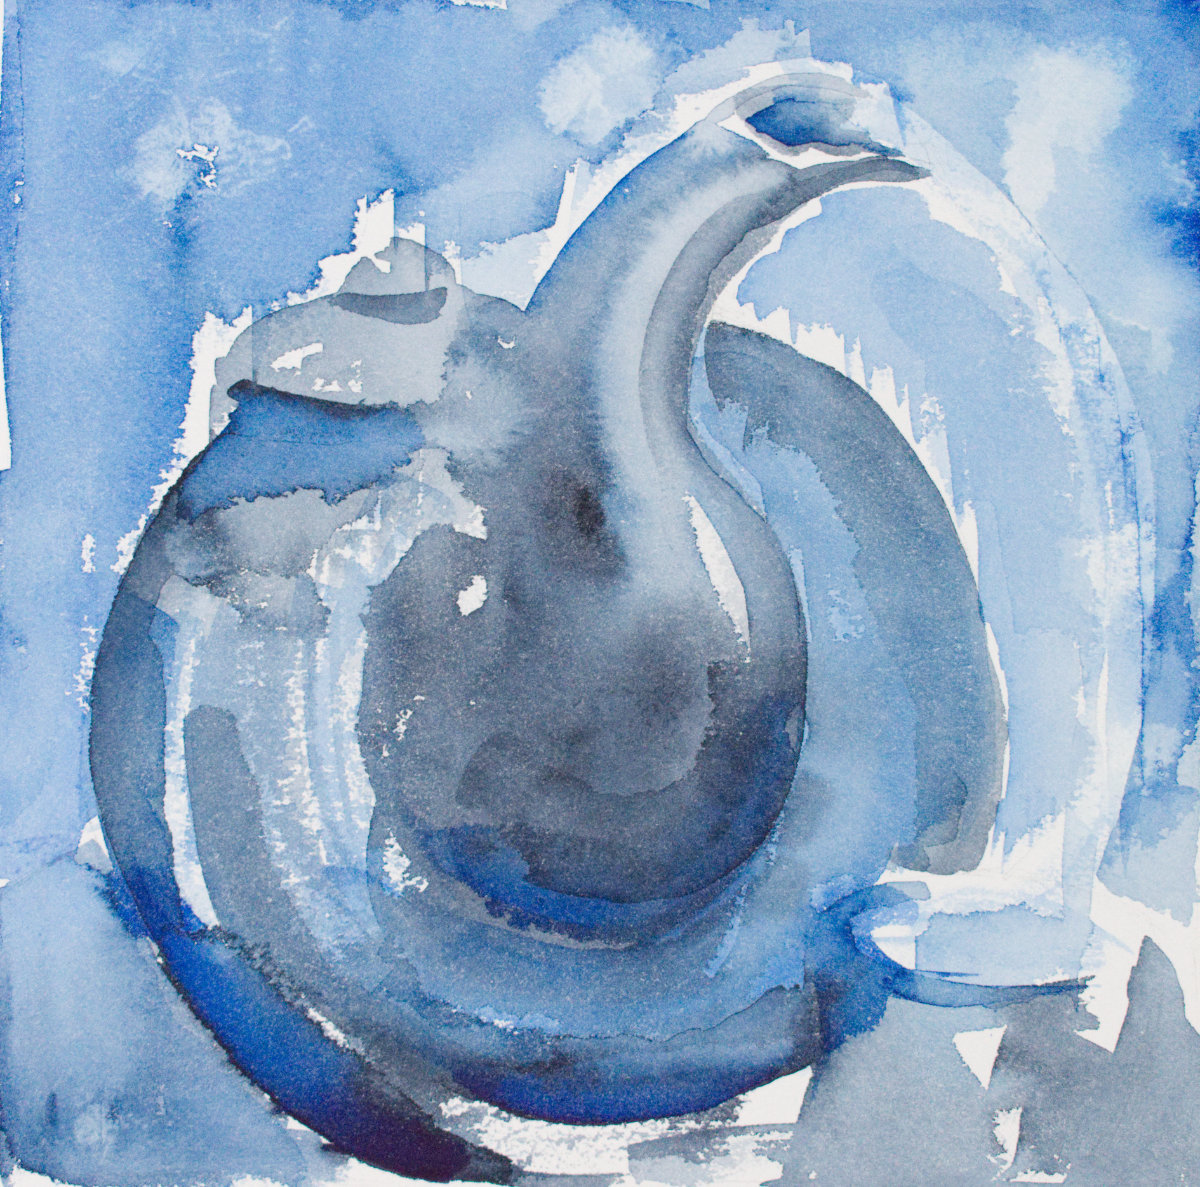 Abstracted Teapot by Brenna O'Toole 